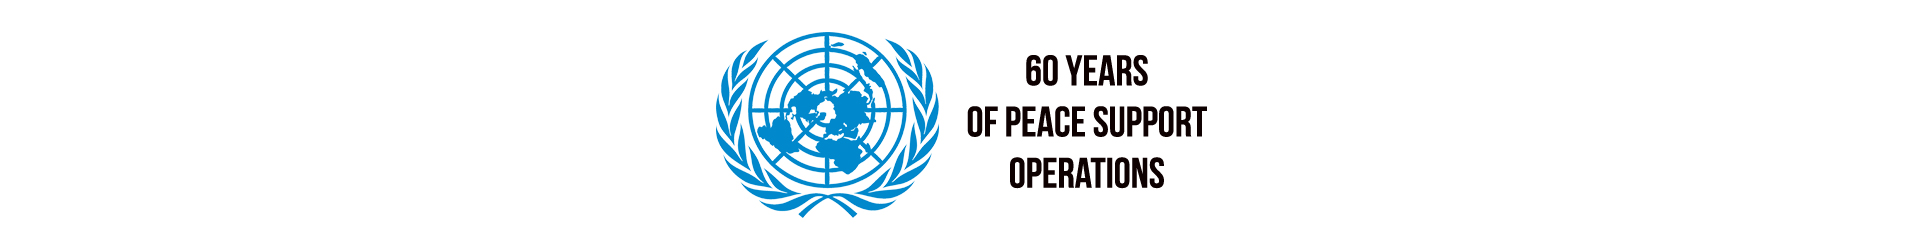 60 Years of Peace Support Operations – 24 June 2018